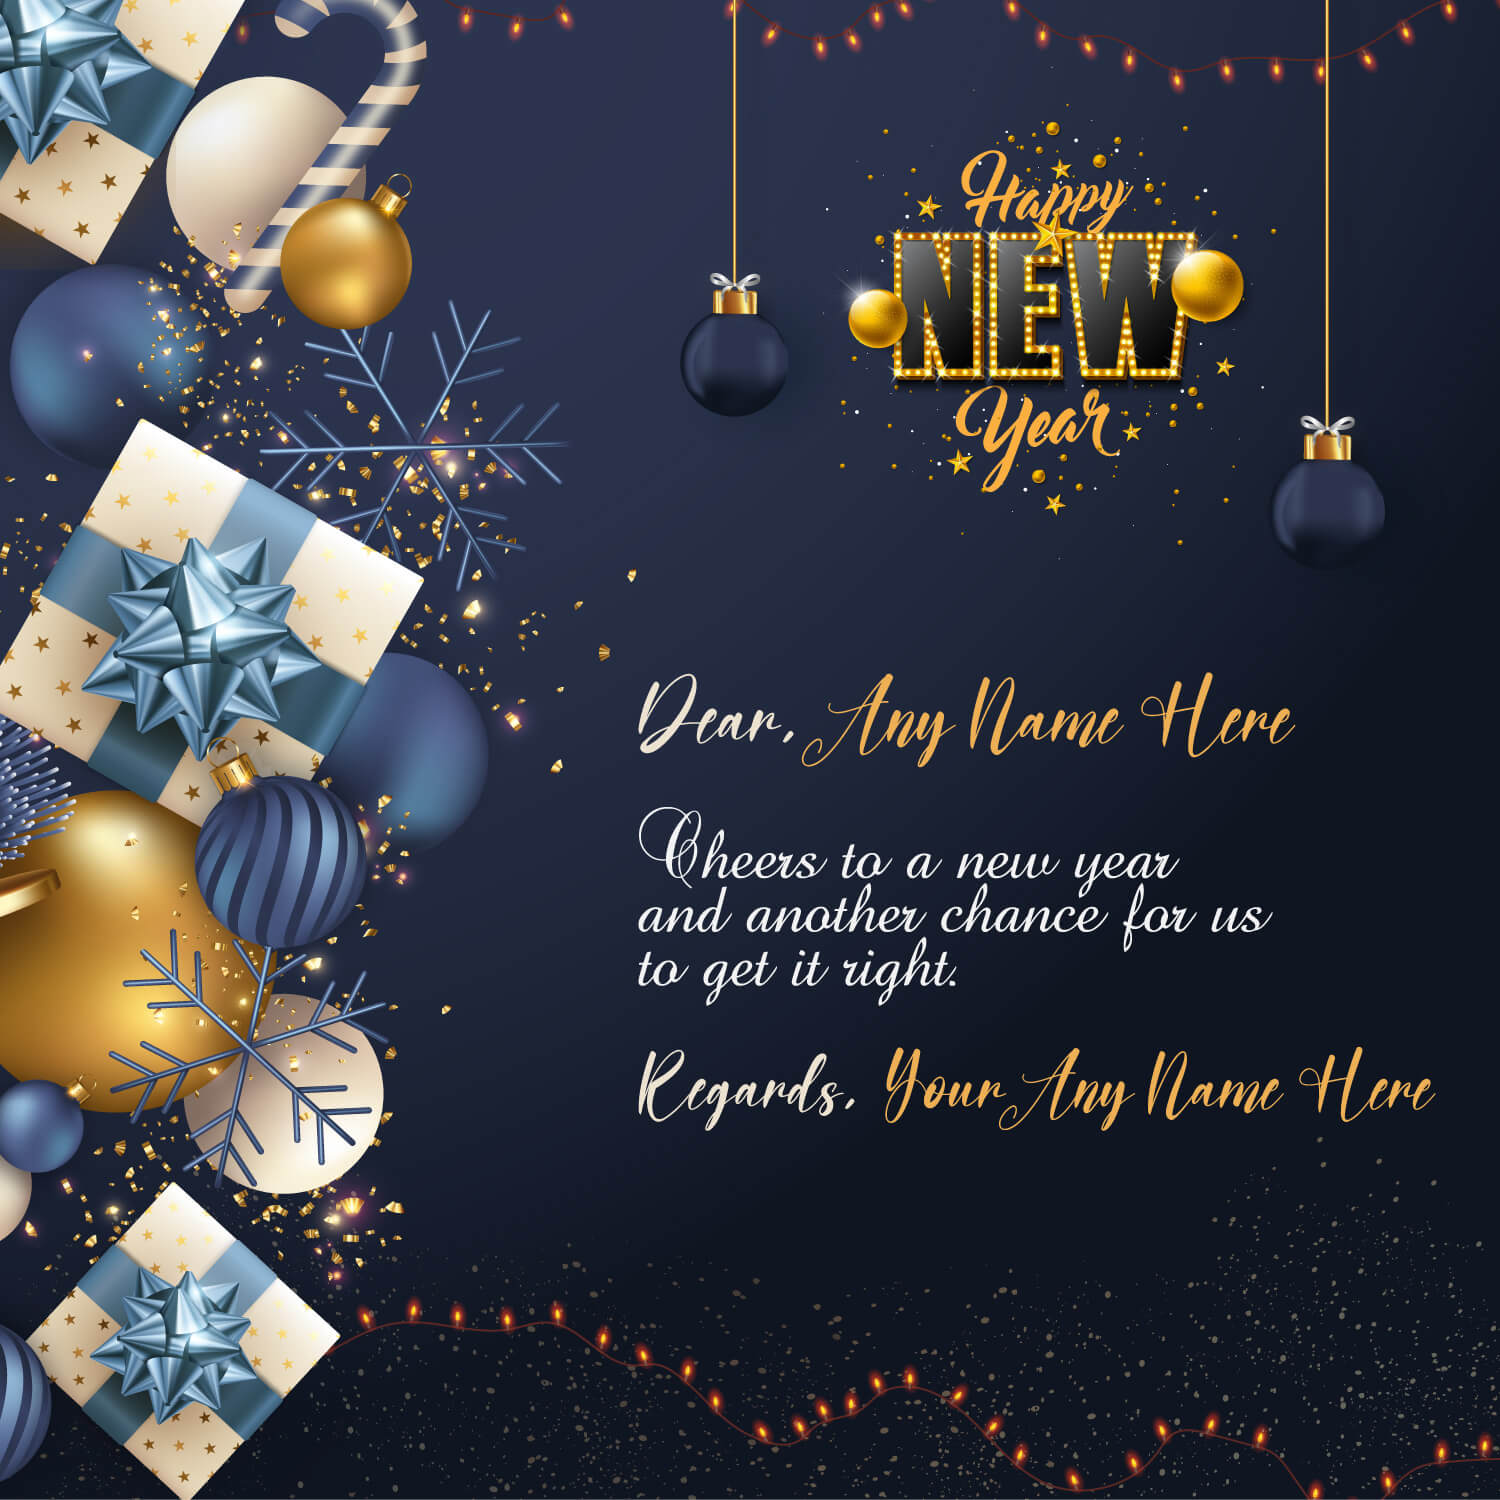 happy new year note for friend family